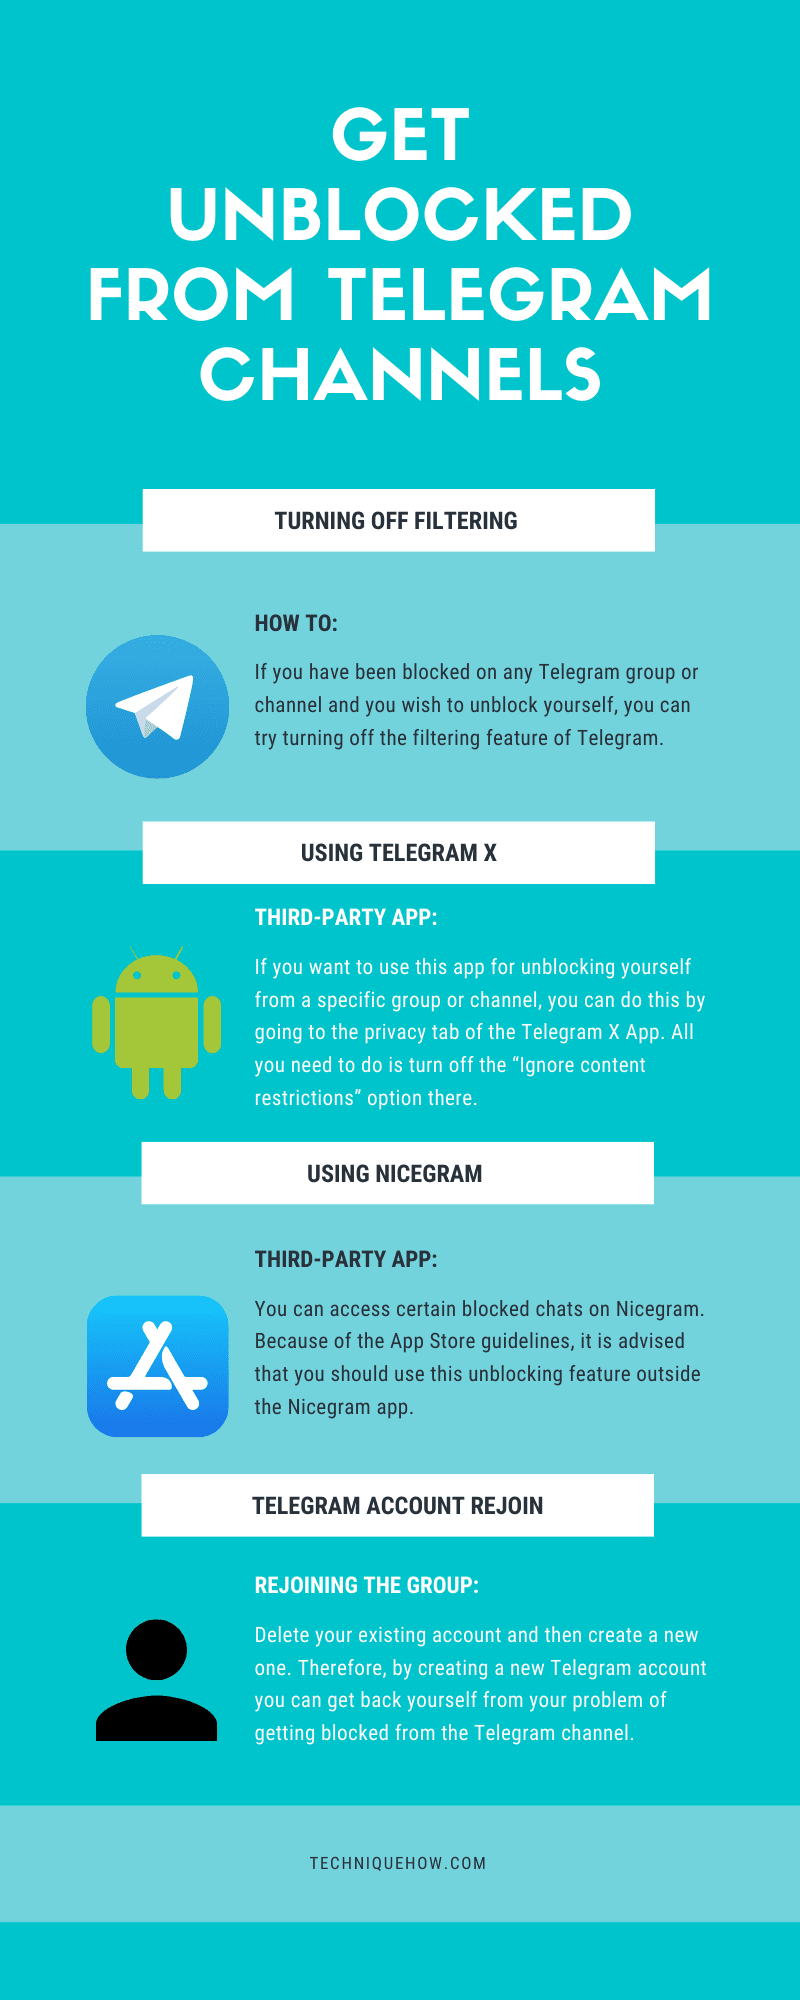 Infographic_Get Unblocked from Telegram Channels